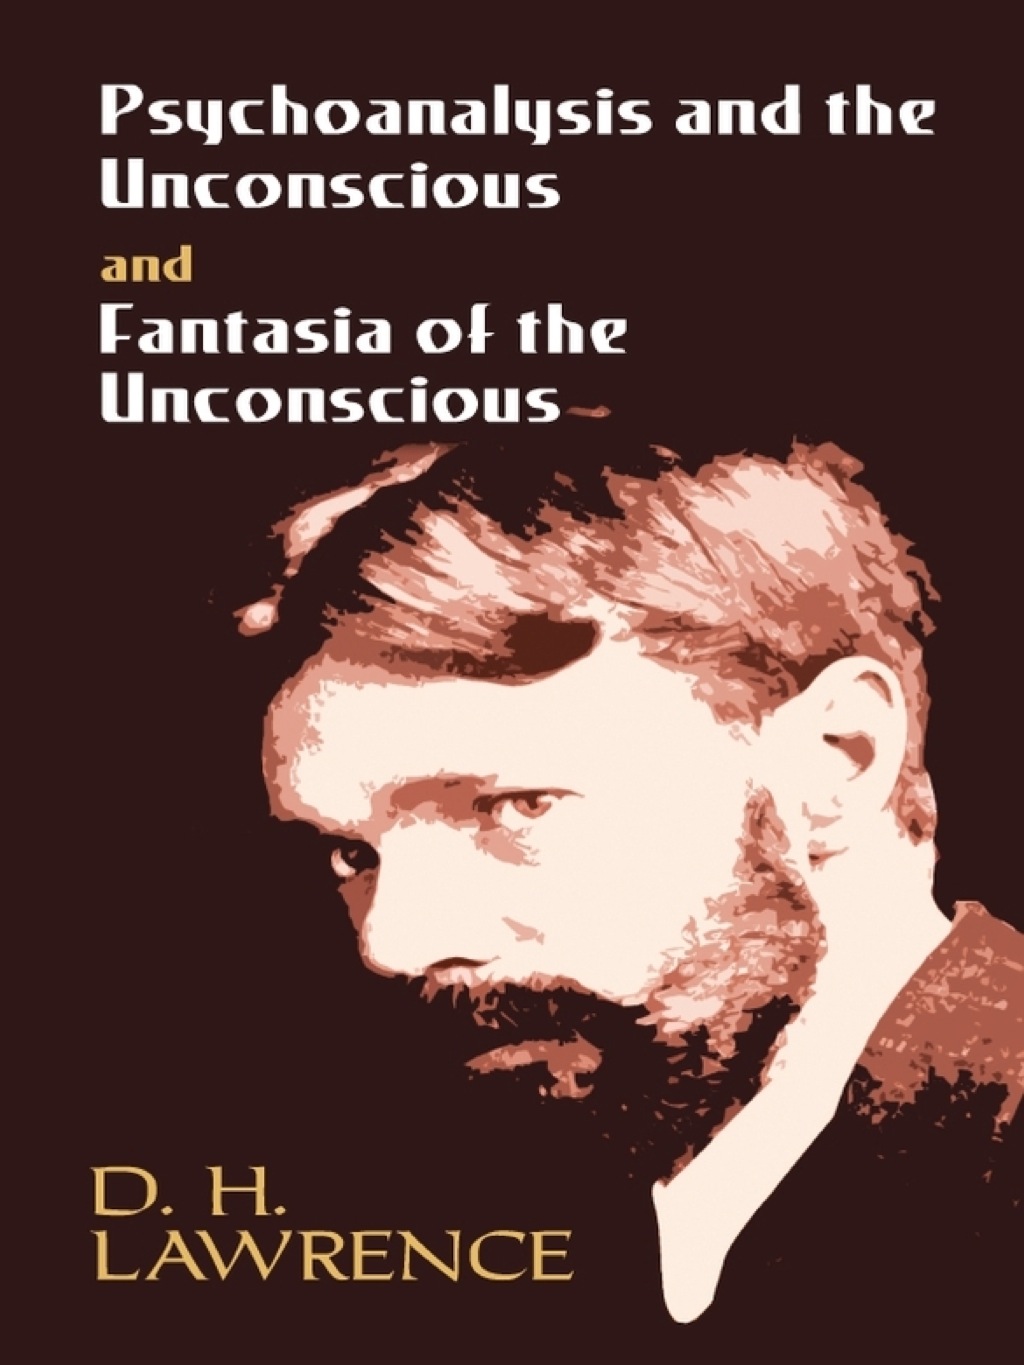 Psychoanalysis and the Unconscious and Fantasia of the Unconscious (eBook) - D. H. Lawrence,